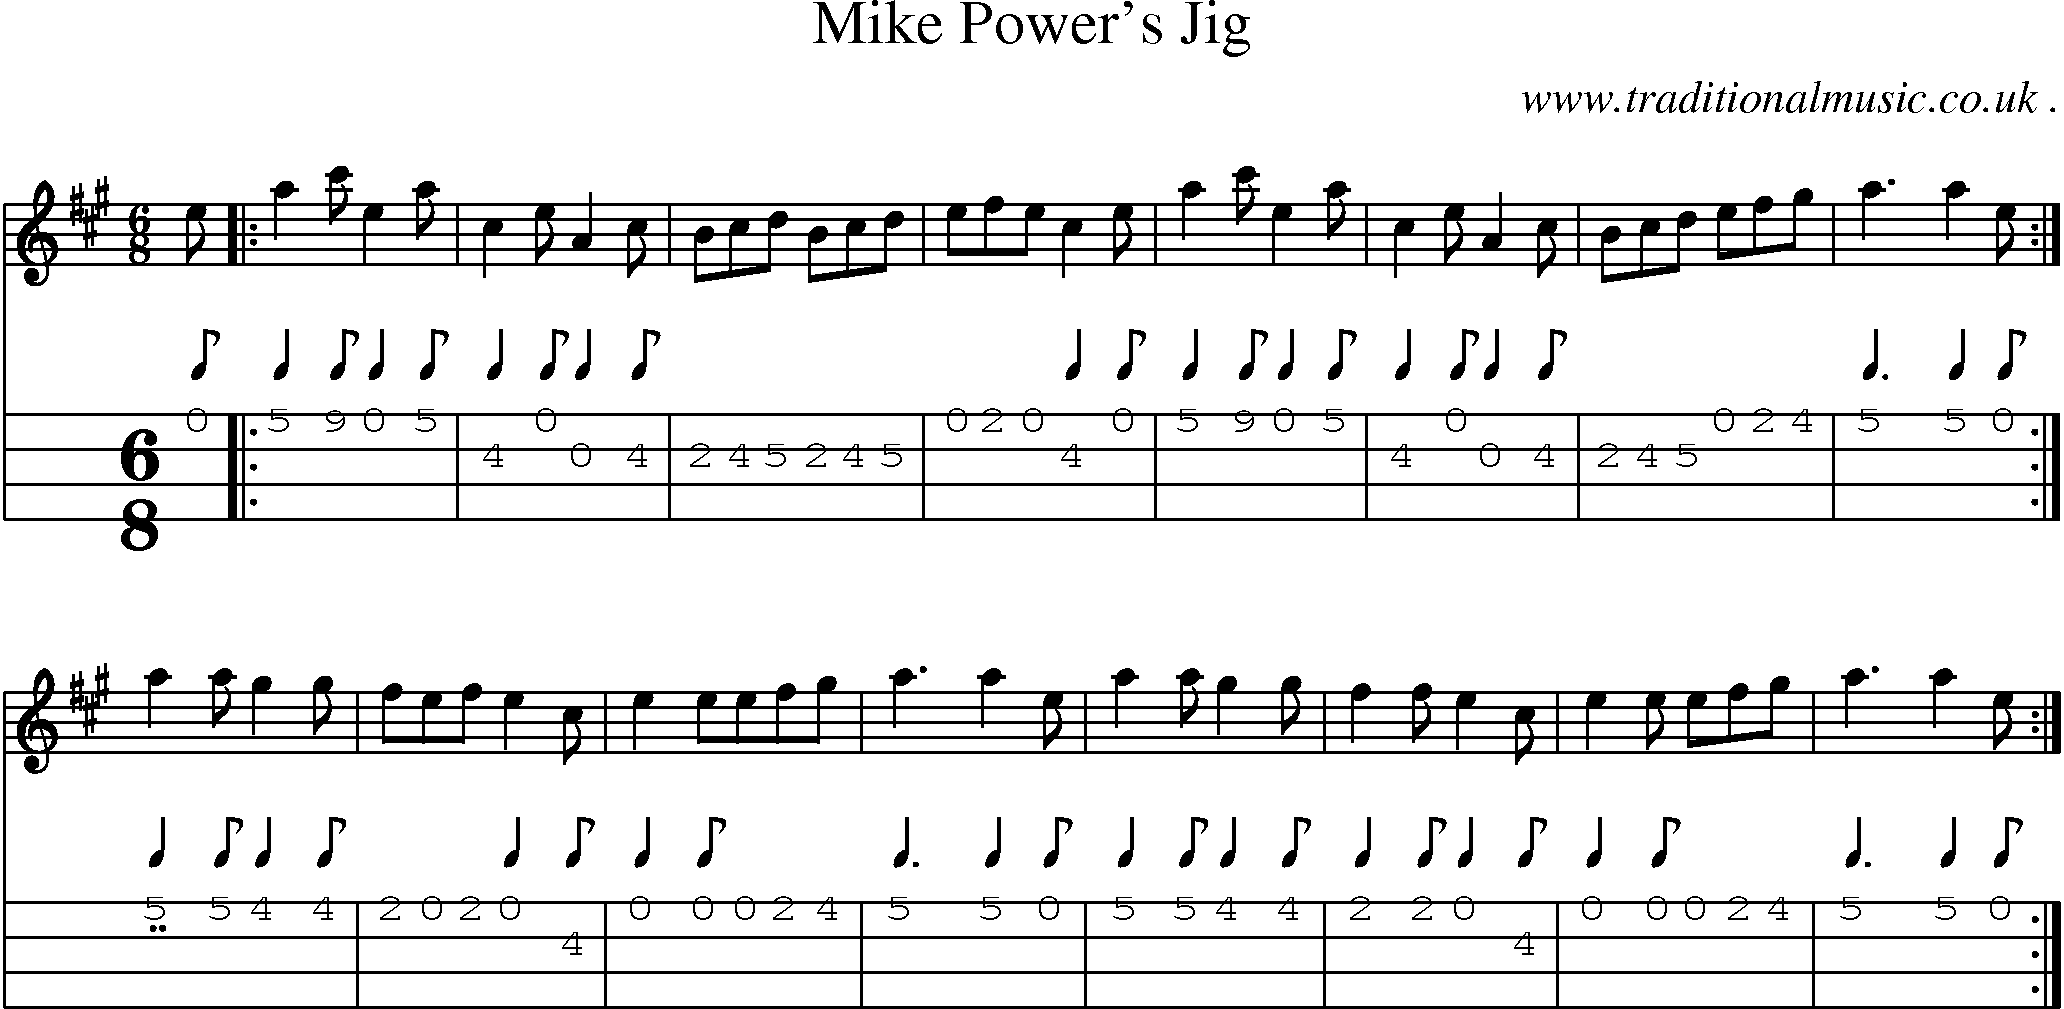 Sheet-music  score, Chords and Mandolin Tabs for Mike Powers Jig